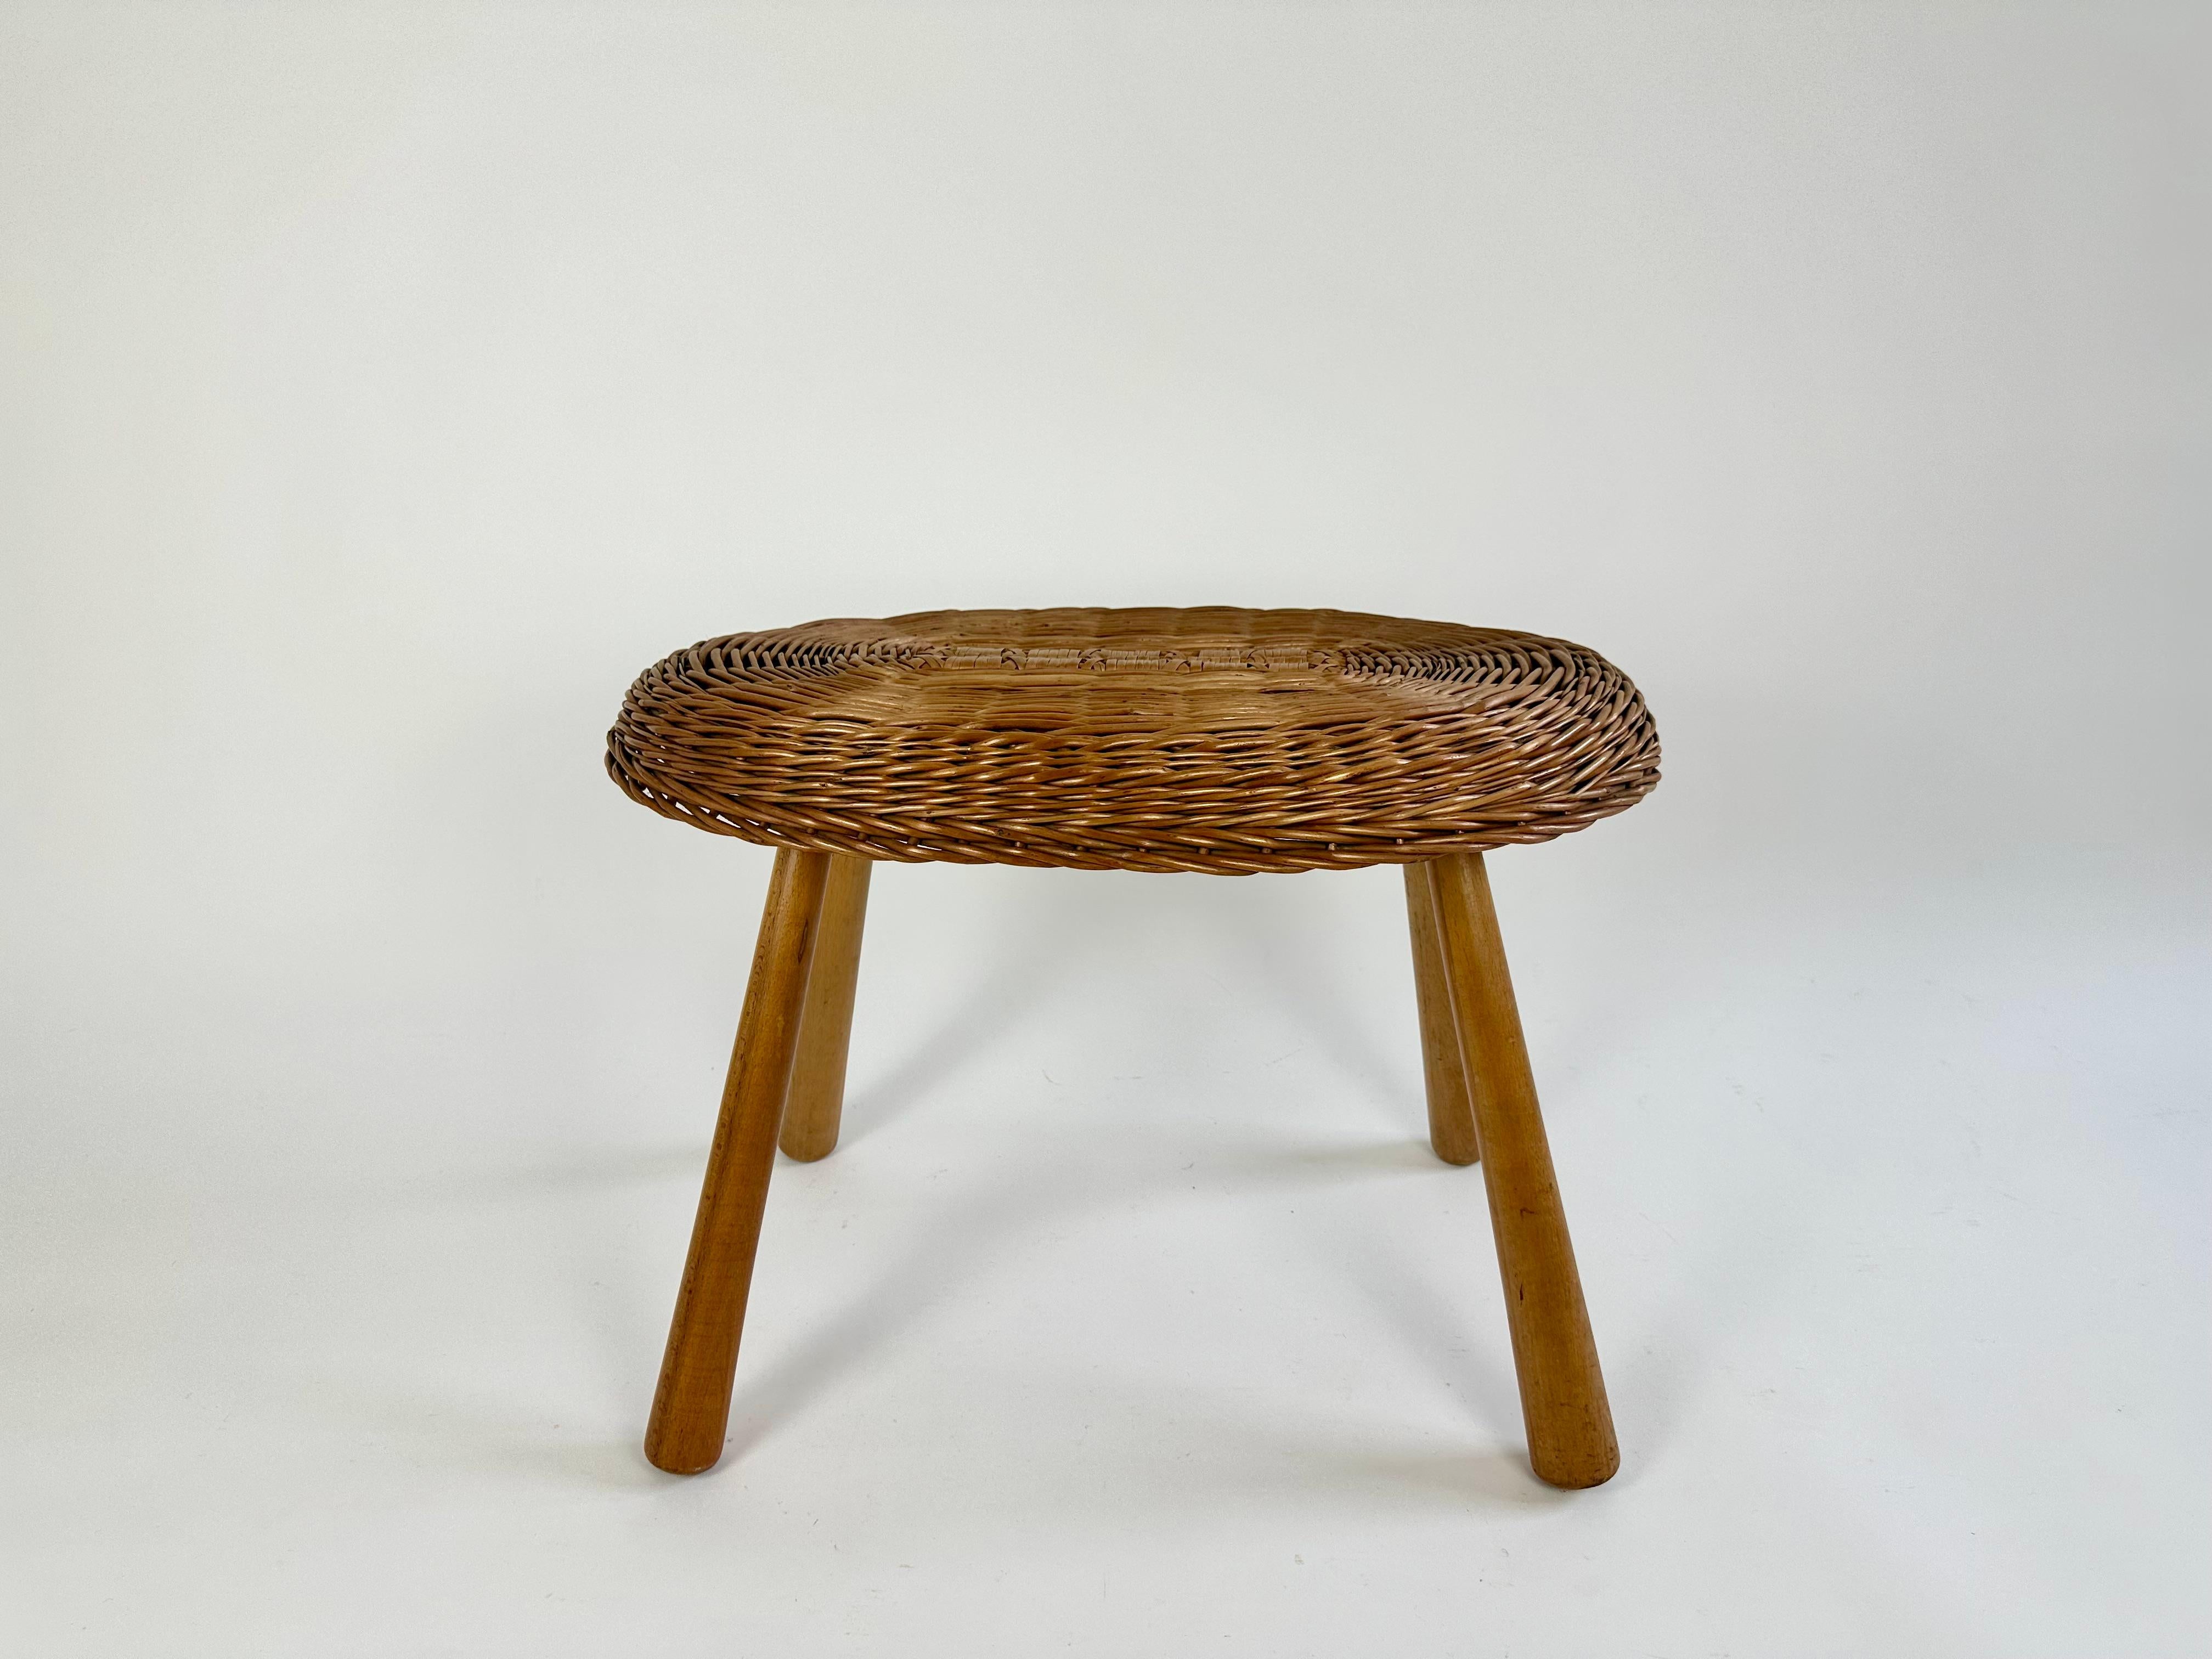 British Vintage wicker side table in the manner of Tony Paul, England c. 1950-60